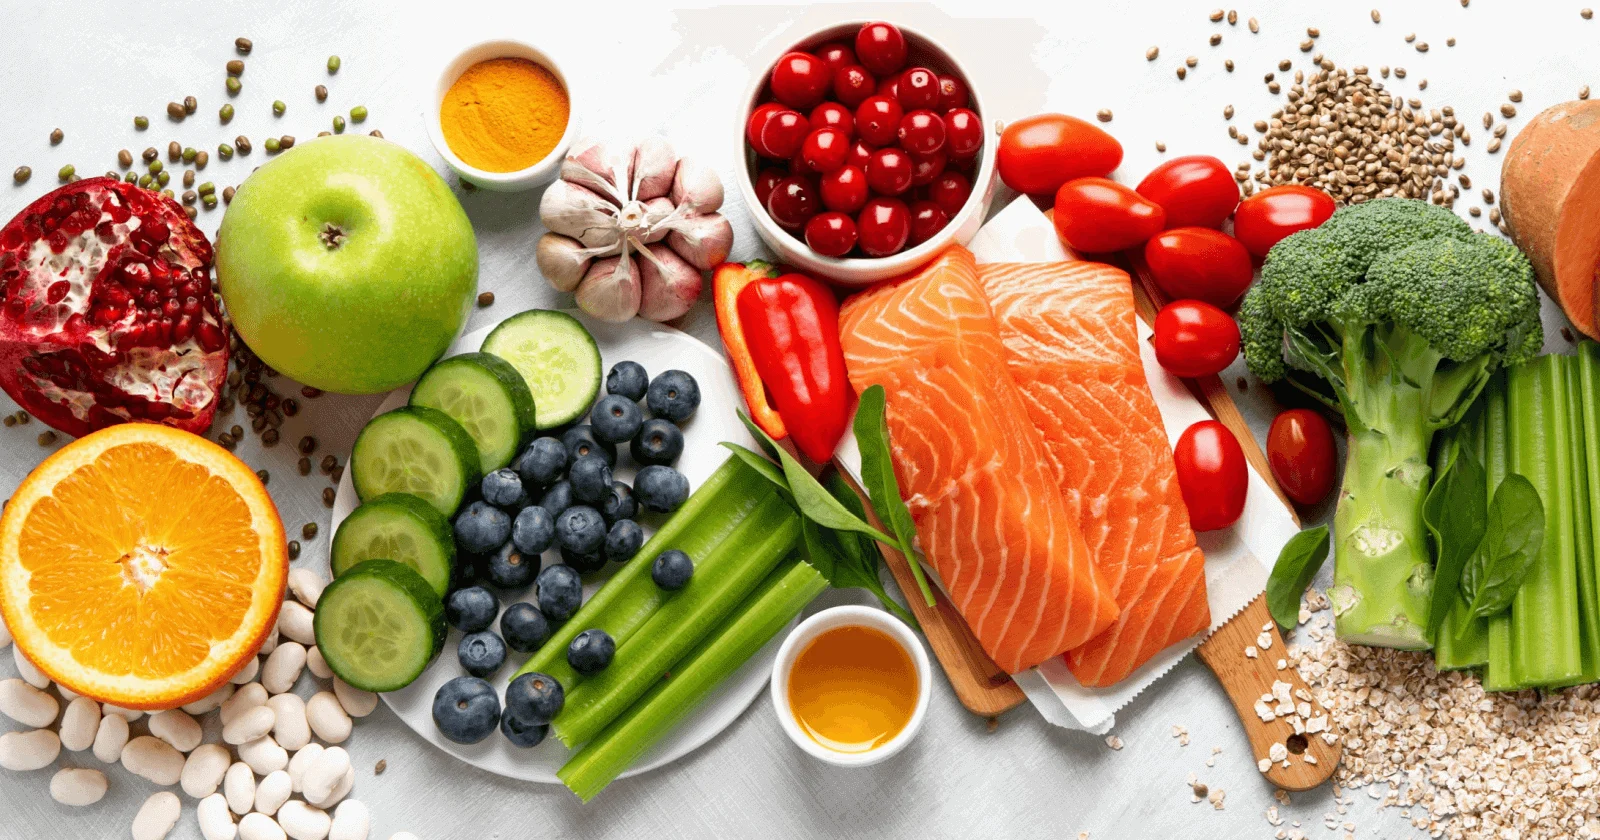 The role of nutrition in promoting healthy aging
